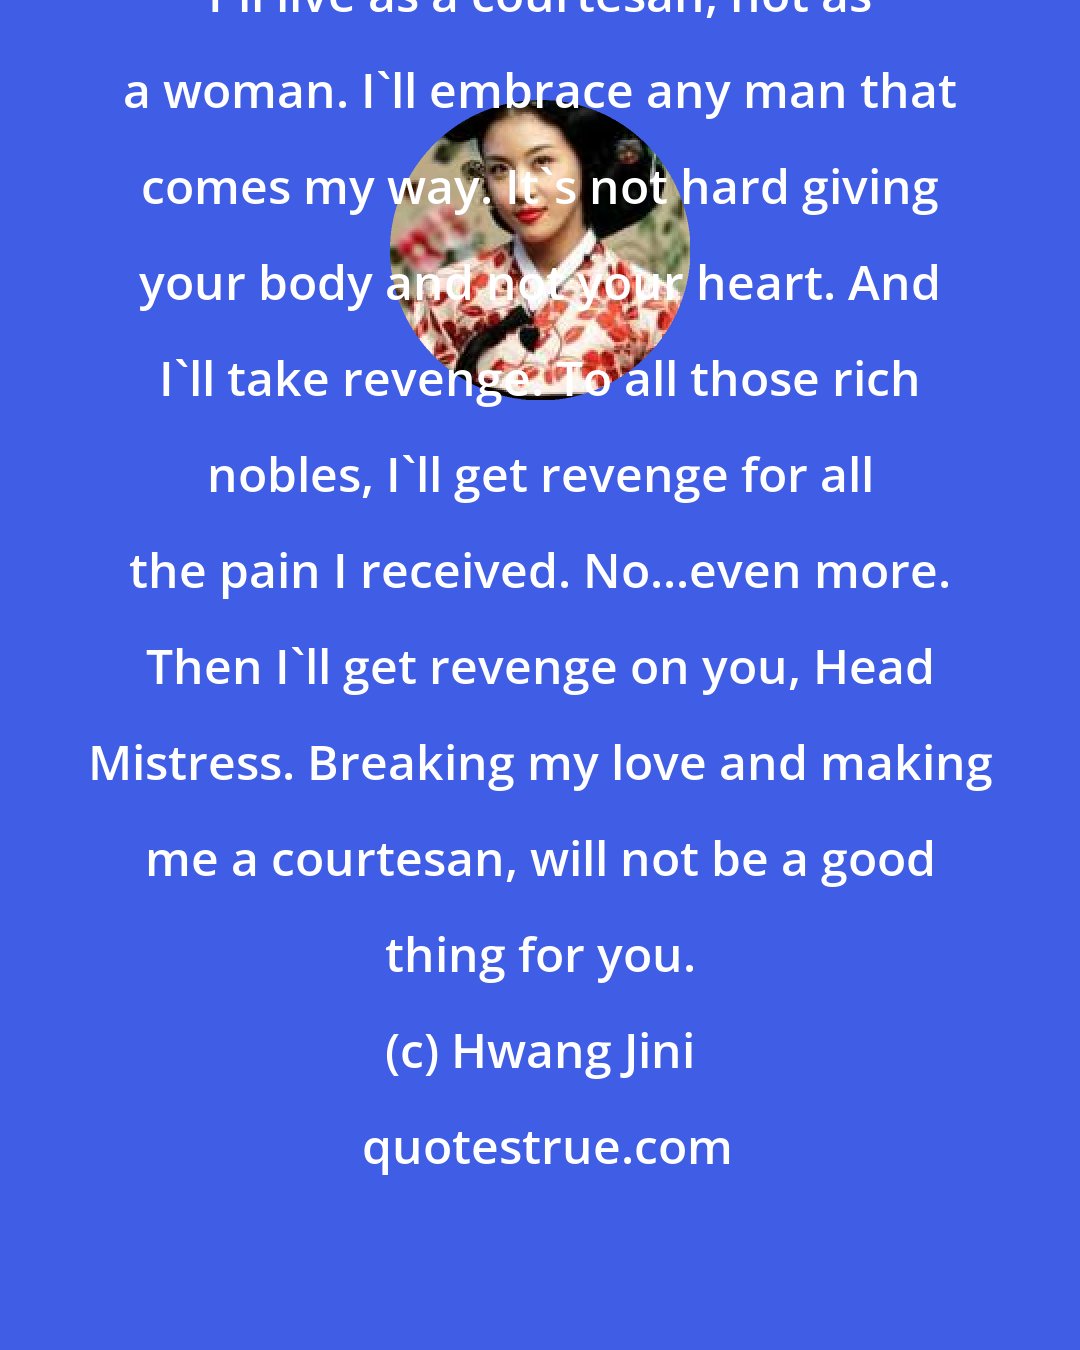 Hwang Jini: I'll live as a courtesan, not as a woman. I'll embrace any man that comes my way. It's not hard giving your body and not your heart. And I'll take revenge. To all those rich nobles, I'll get revenge for all the pain I received. No...even more. Then I'll get revenge on you, Head Mistress. Breaking my love and making me a courtesan, will not be a good thing for you.